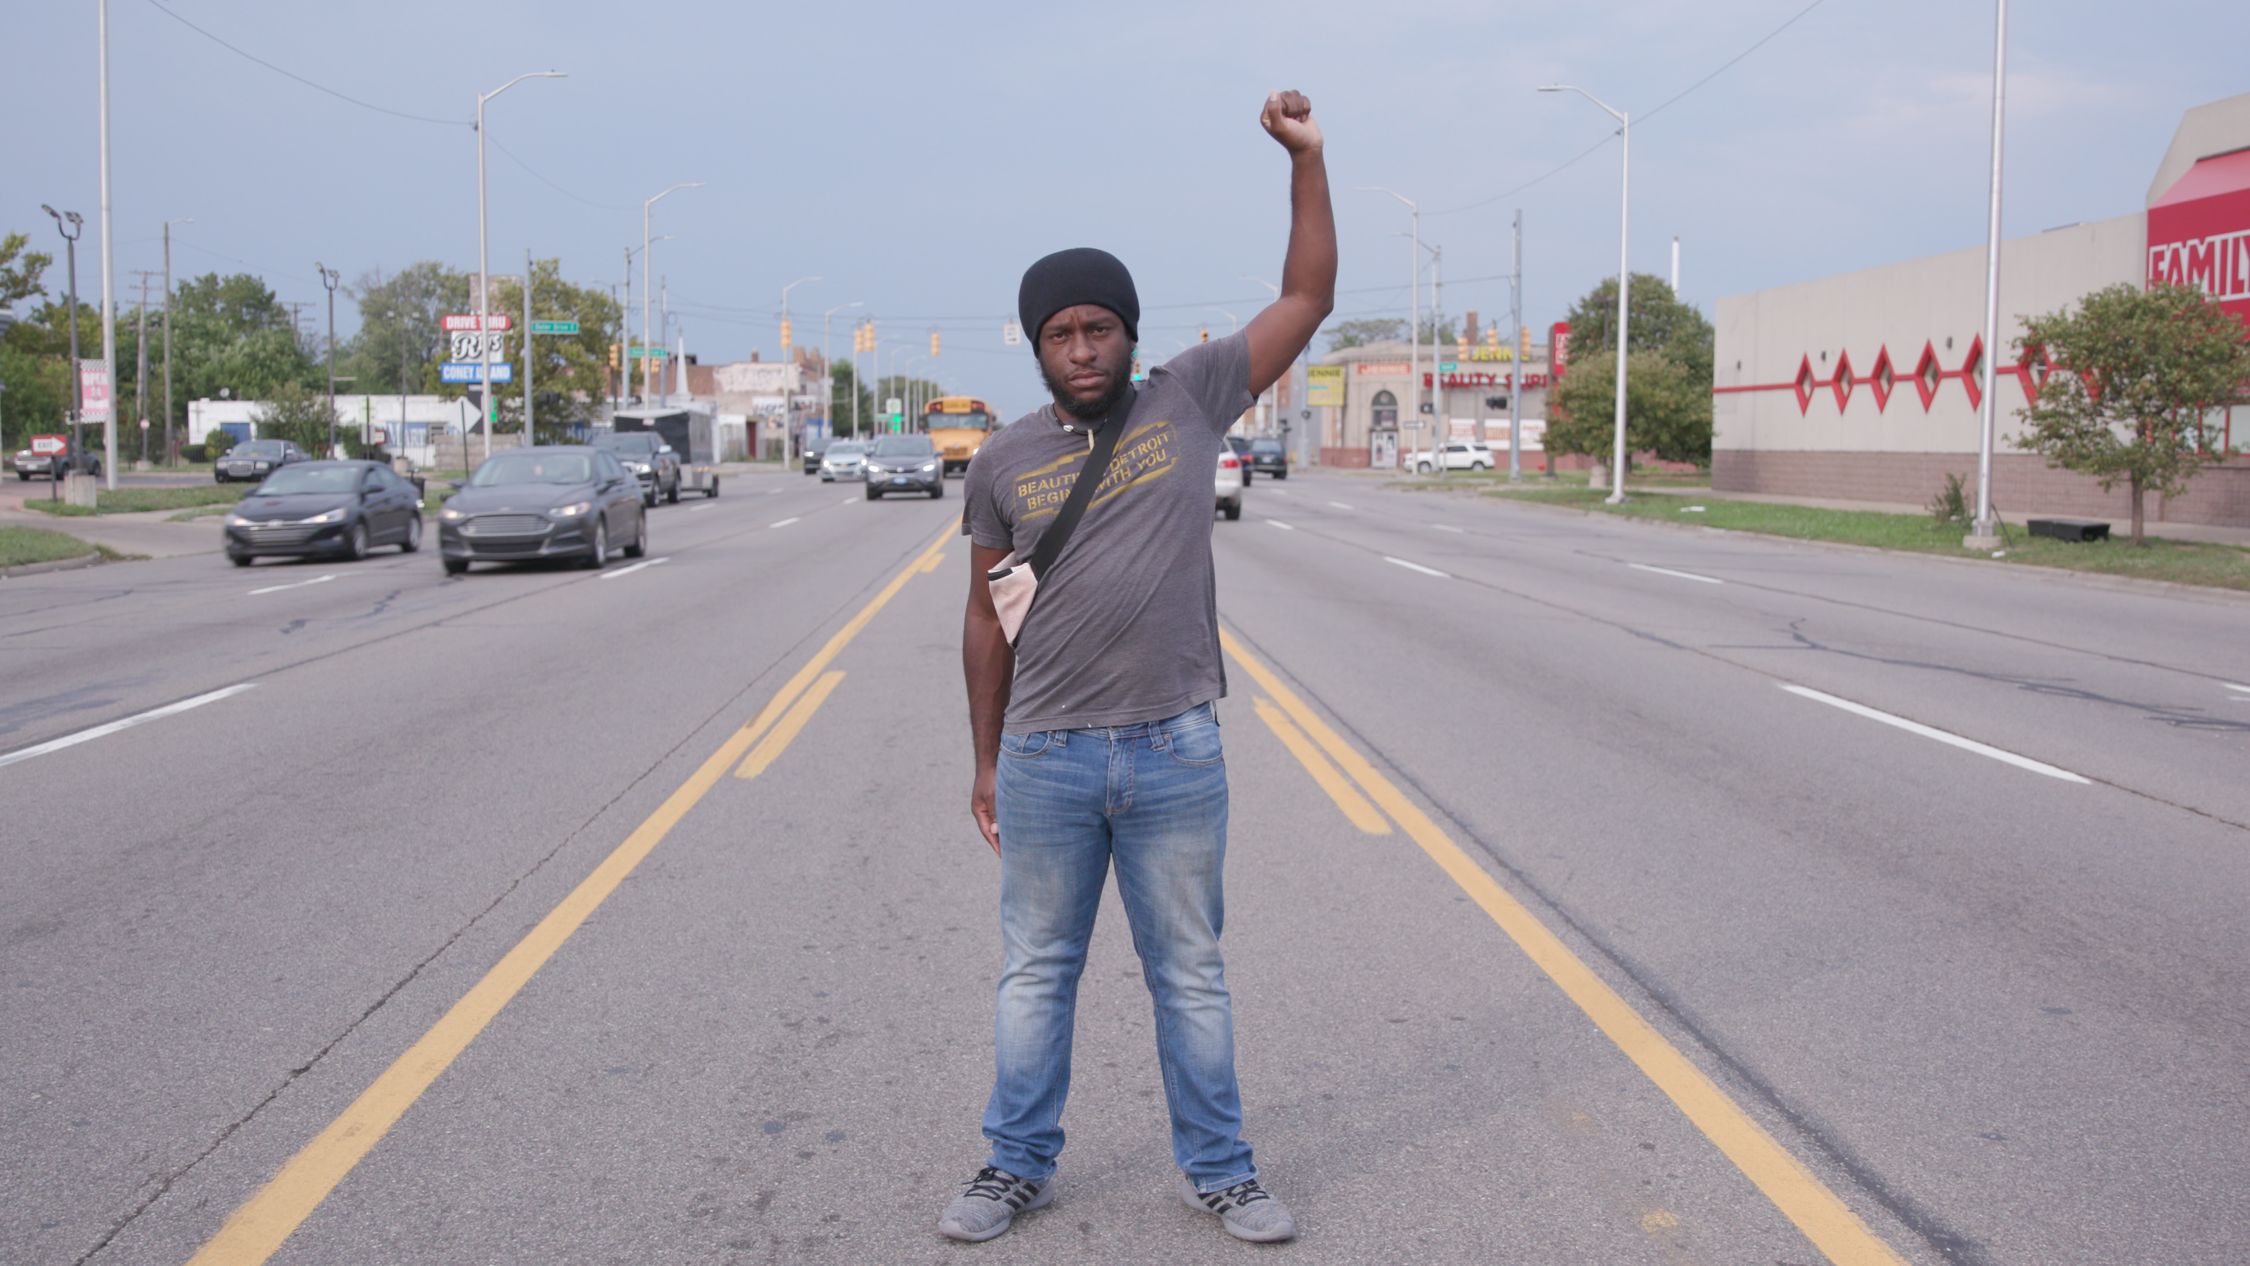 A person is standing in the center of a street with one fist raised high. The individual is wearing a dark beanie, a t-shirt, and jeans, and has a serious expression. The street is lined with various commercial buildings and cars are visible in both directions. The context of the raised fist, a symbol often associated with solidarity and support for a cause, suggests a moment of protest or statement. The image captures a sense of defiance or activism.